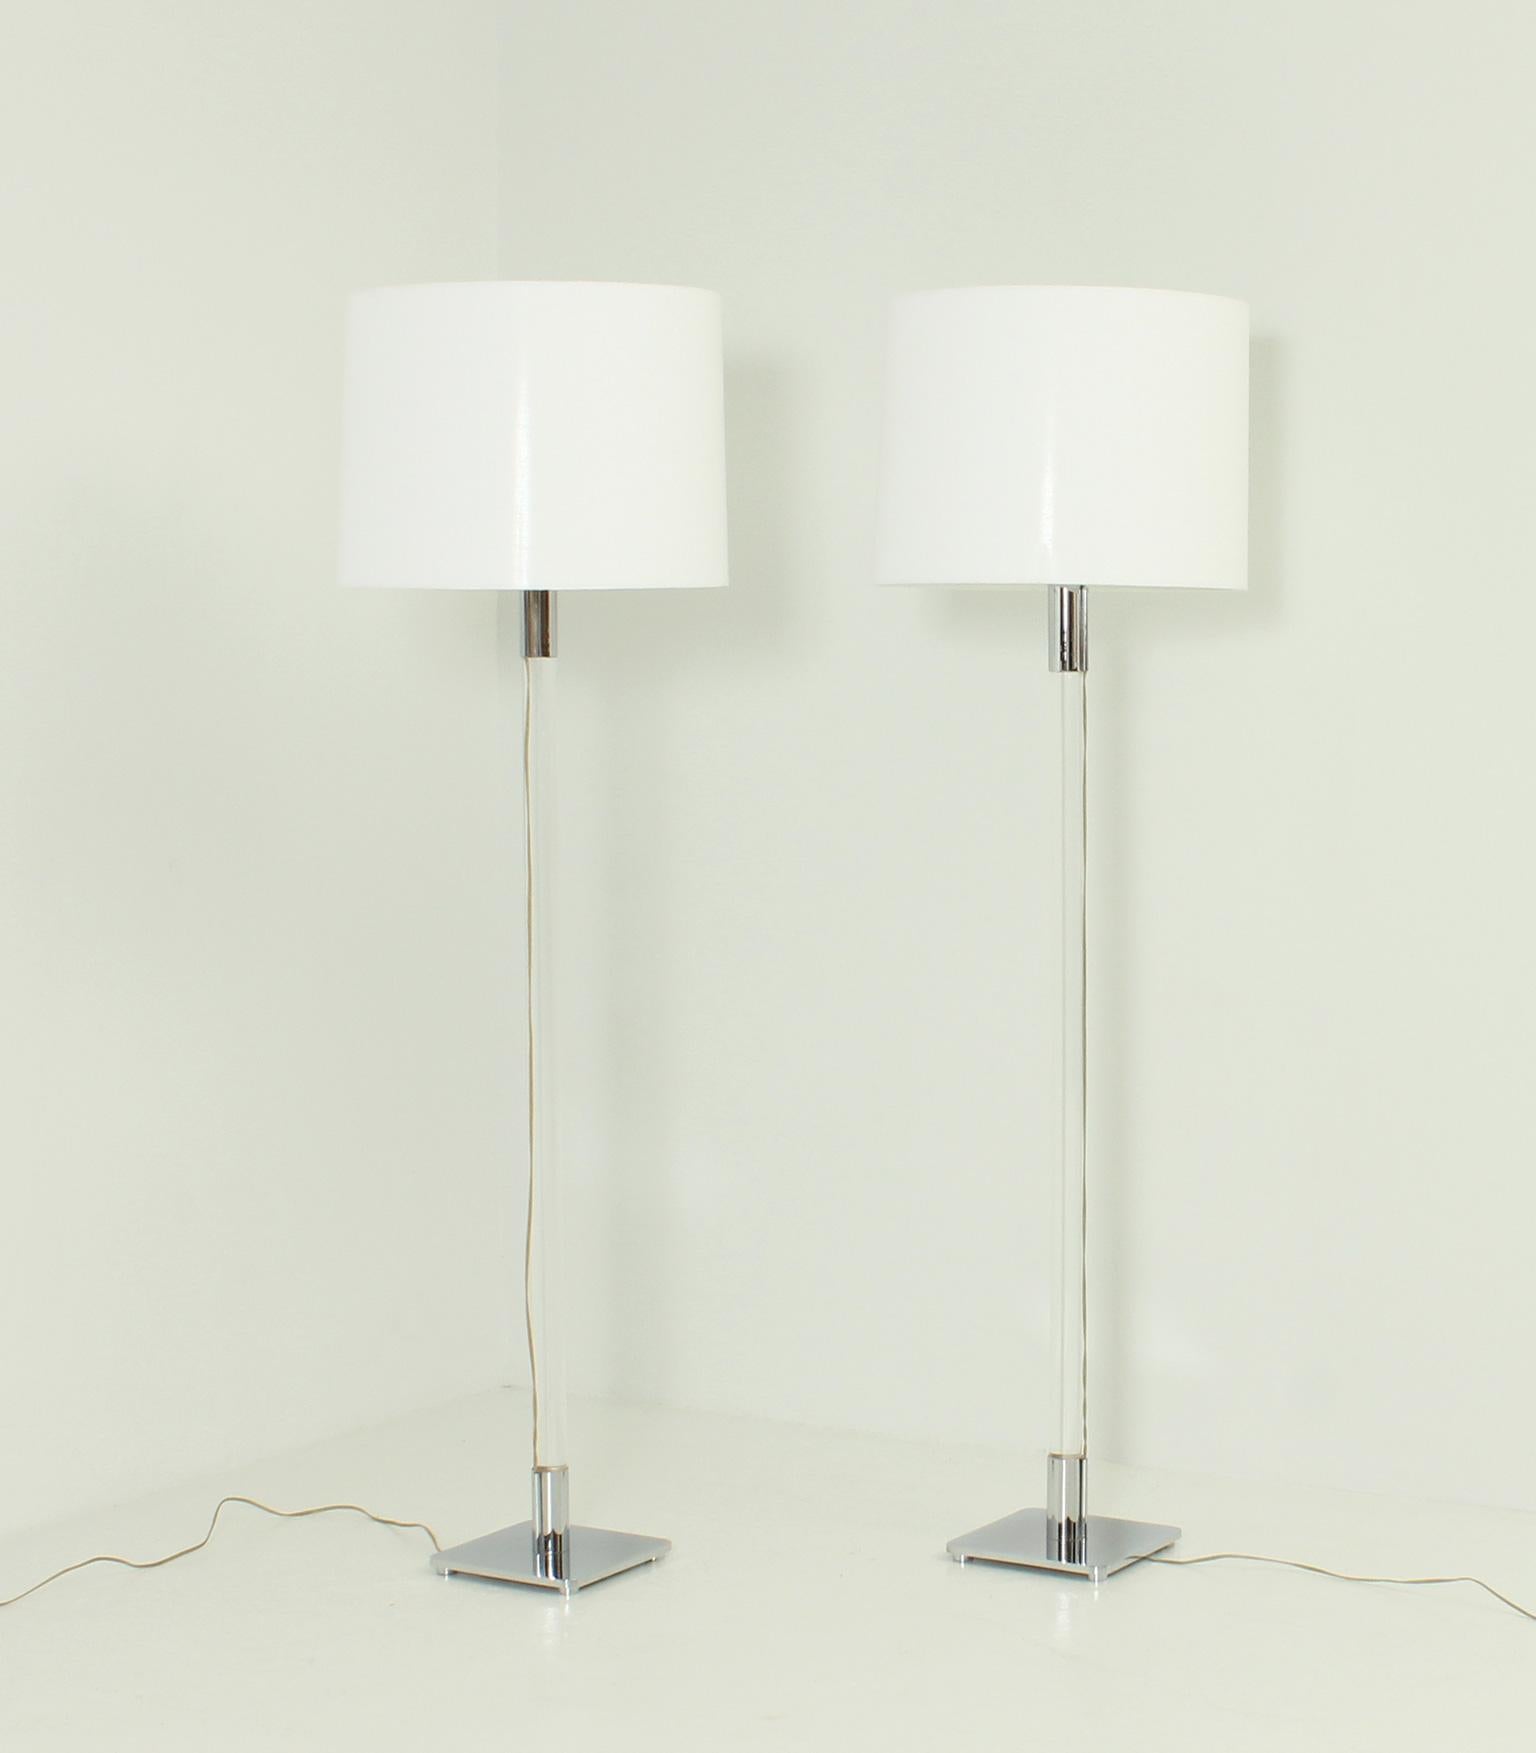 Pair of Hansen floor lamps designed in 1970's by George Hansen for Metalarte, Spain. Chromed-plated brass and plexiglass column, multiple rotary switch beneath diffuser assembly for 1, 2 or 3 bulbs. Original shades with new fabric.